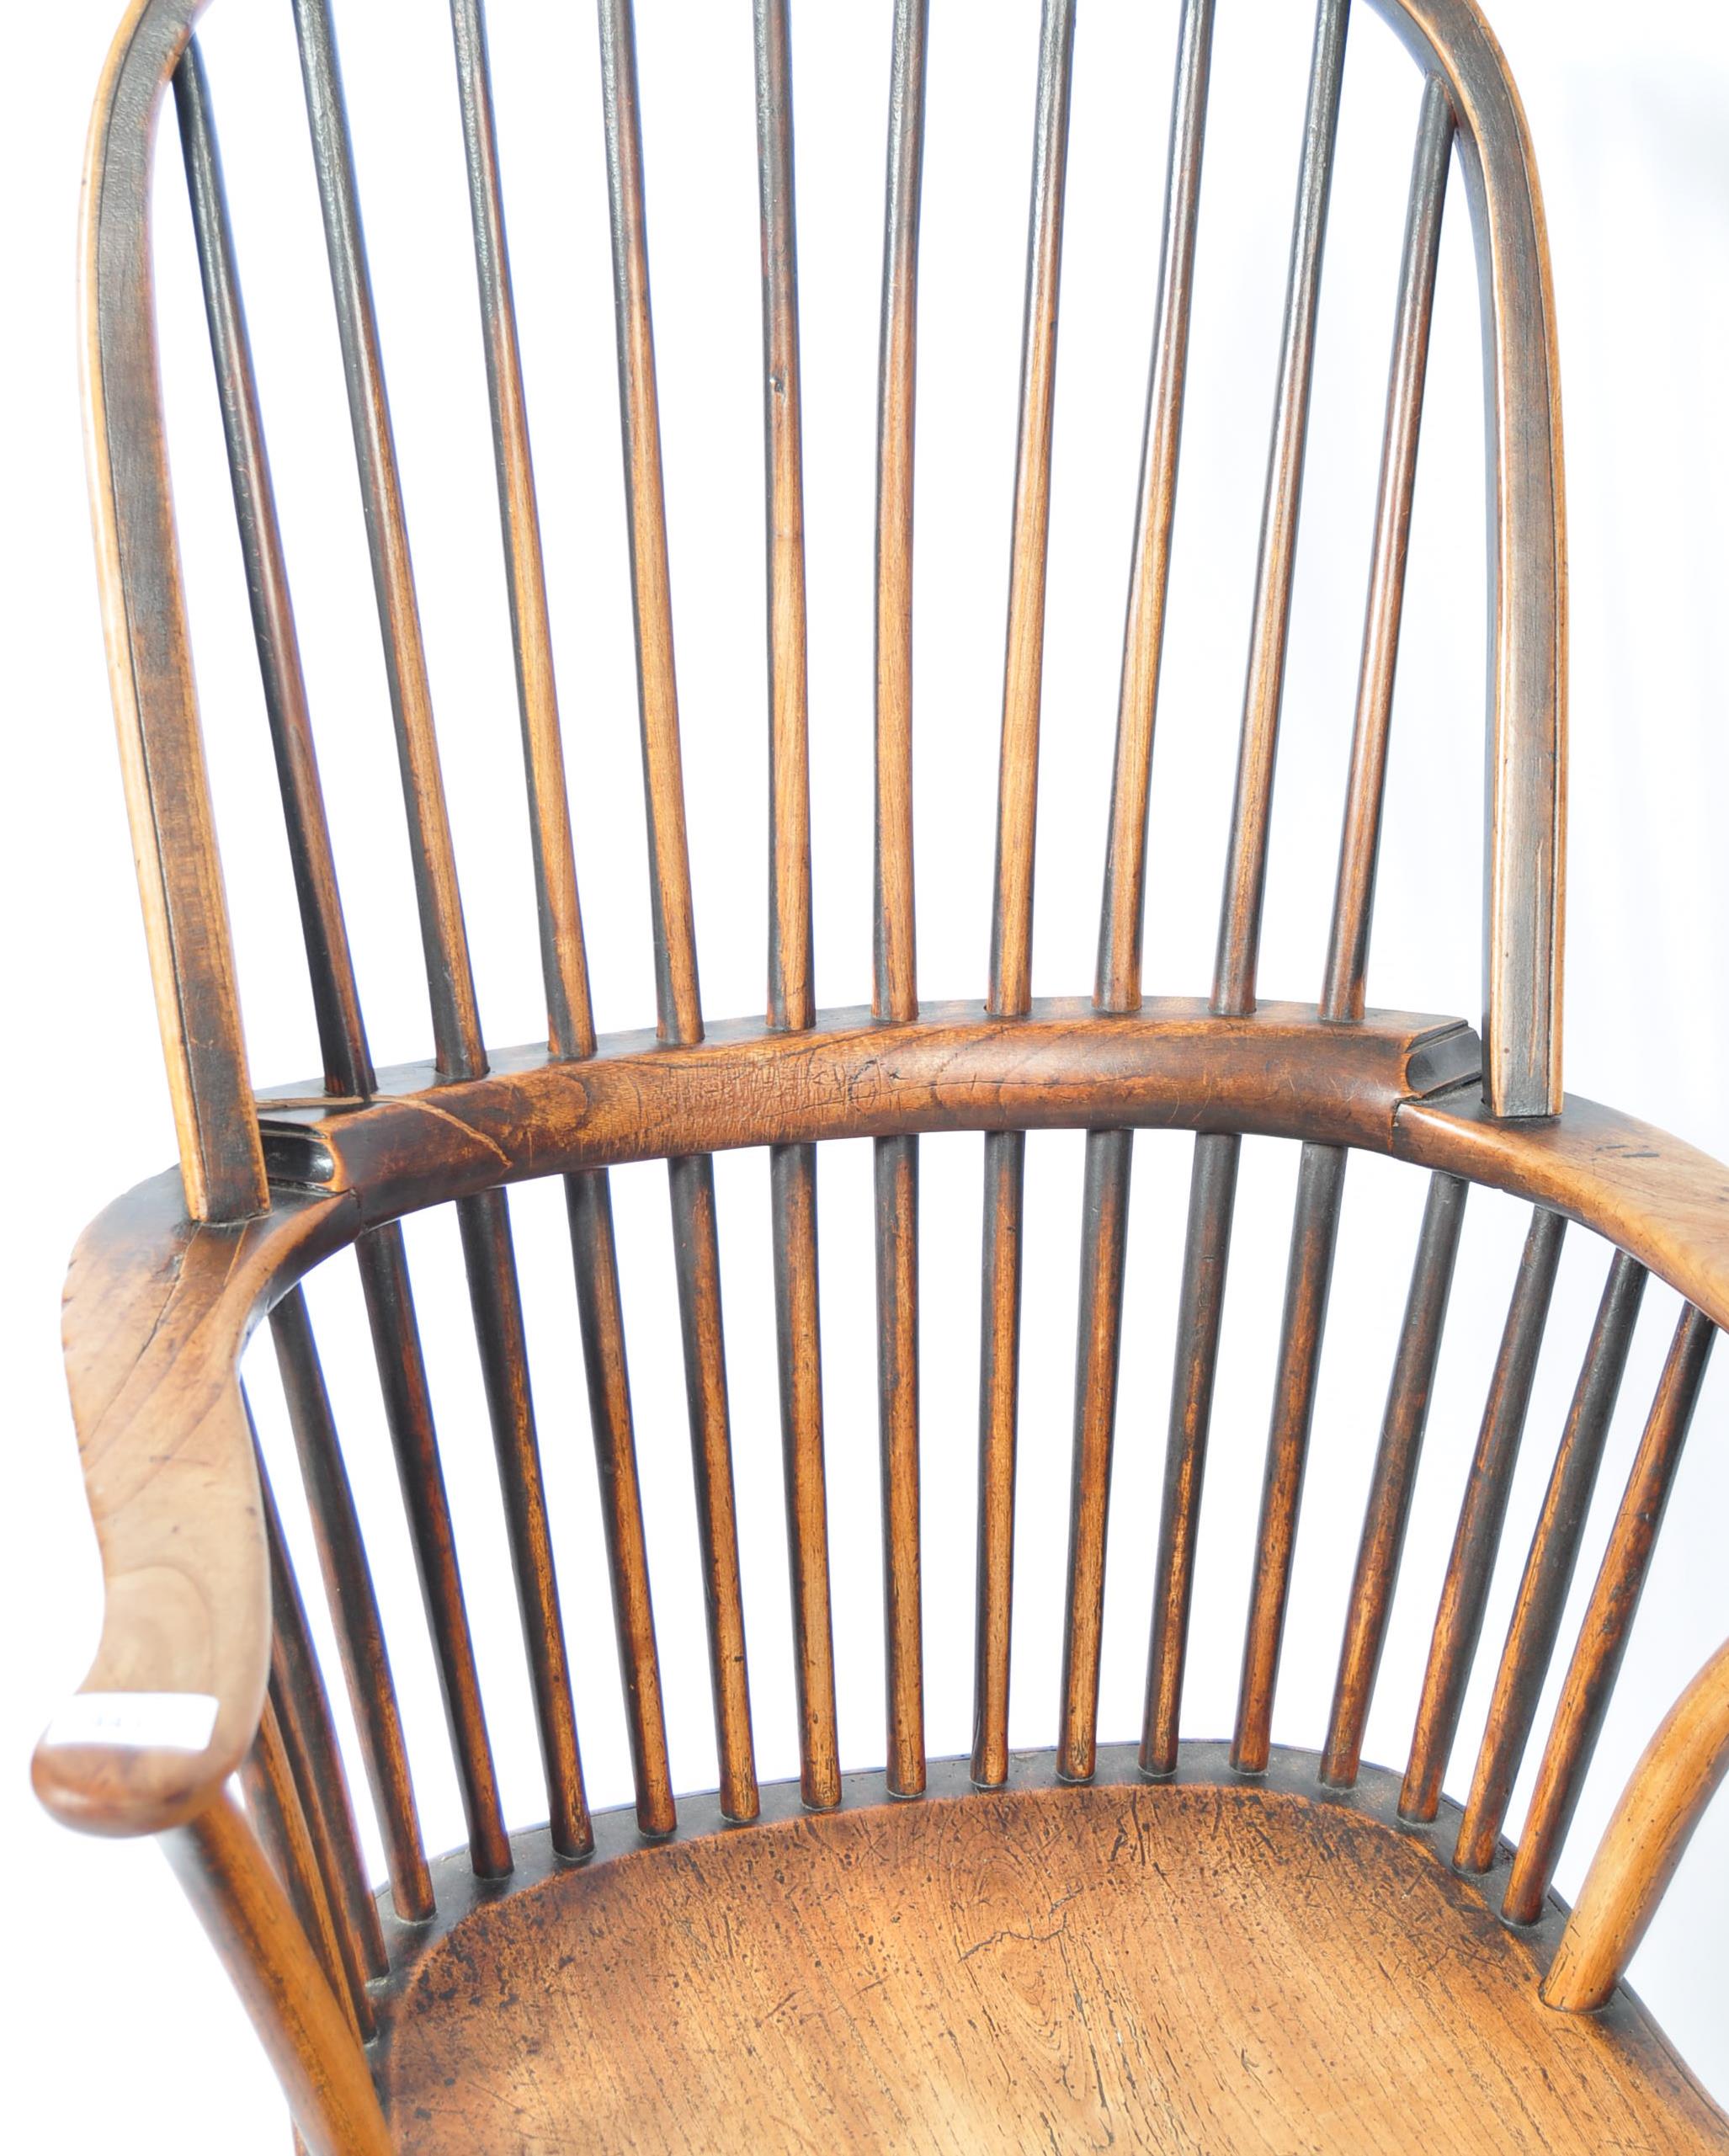 19TH CENTURY ENGLISH ANTIQUE BEECH AND ELM WINDSOR CHAIR - Image 3 of 7